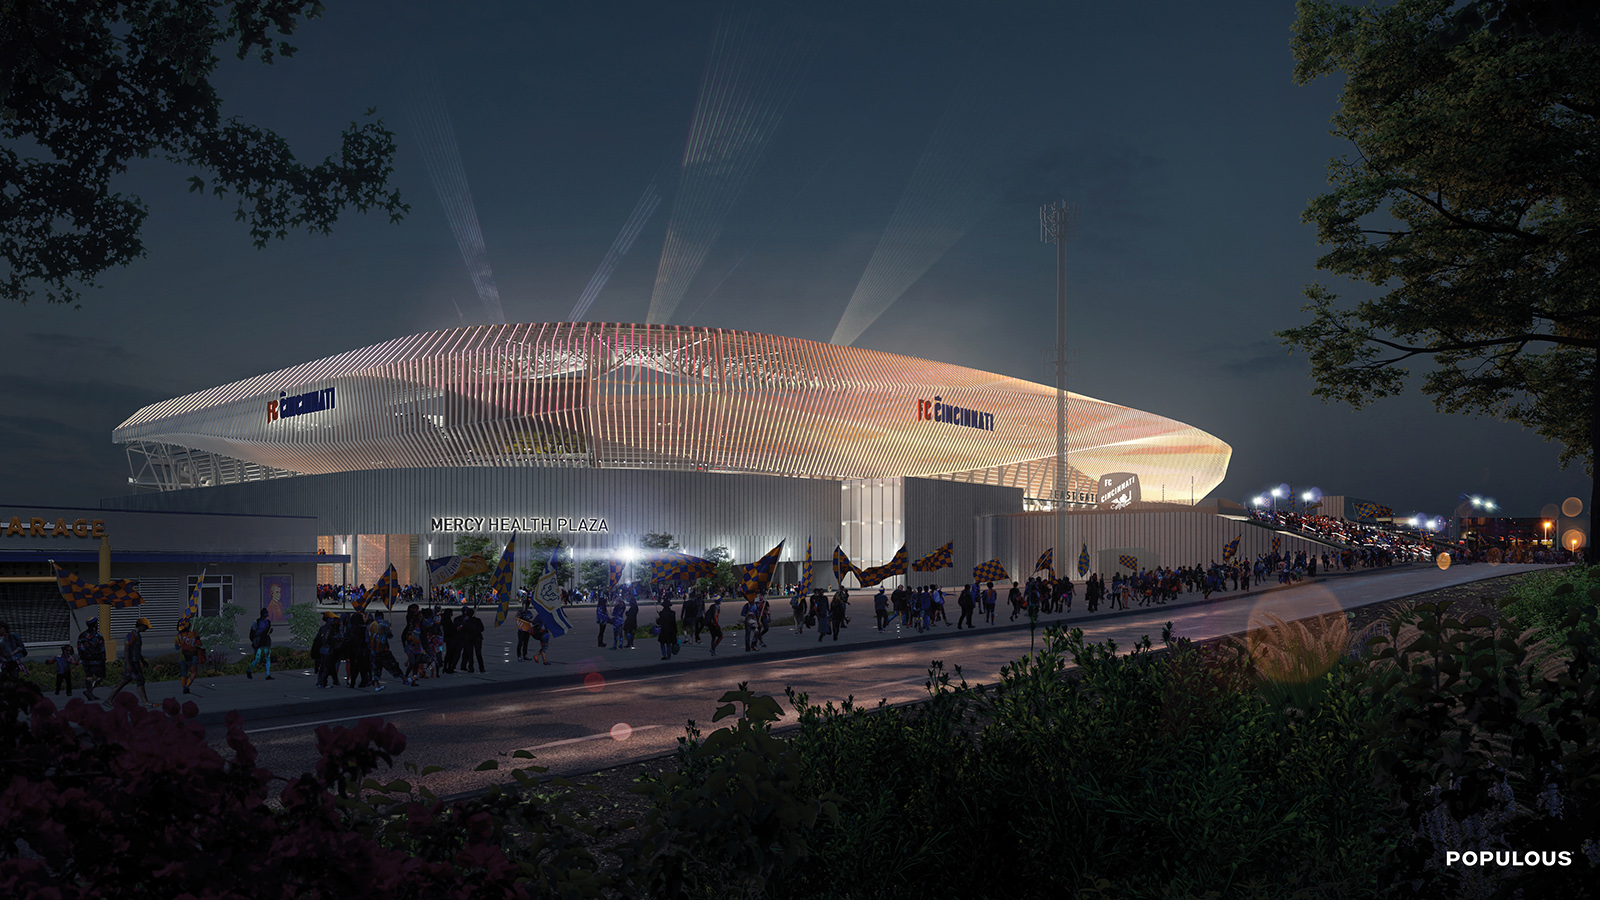 Rendering of a soccer stadium at night, clad in vertical fins